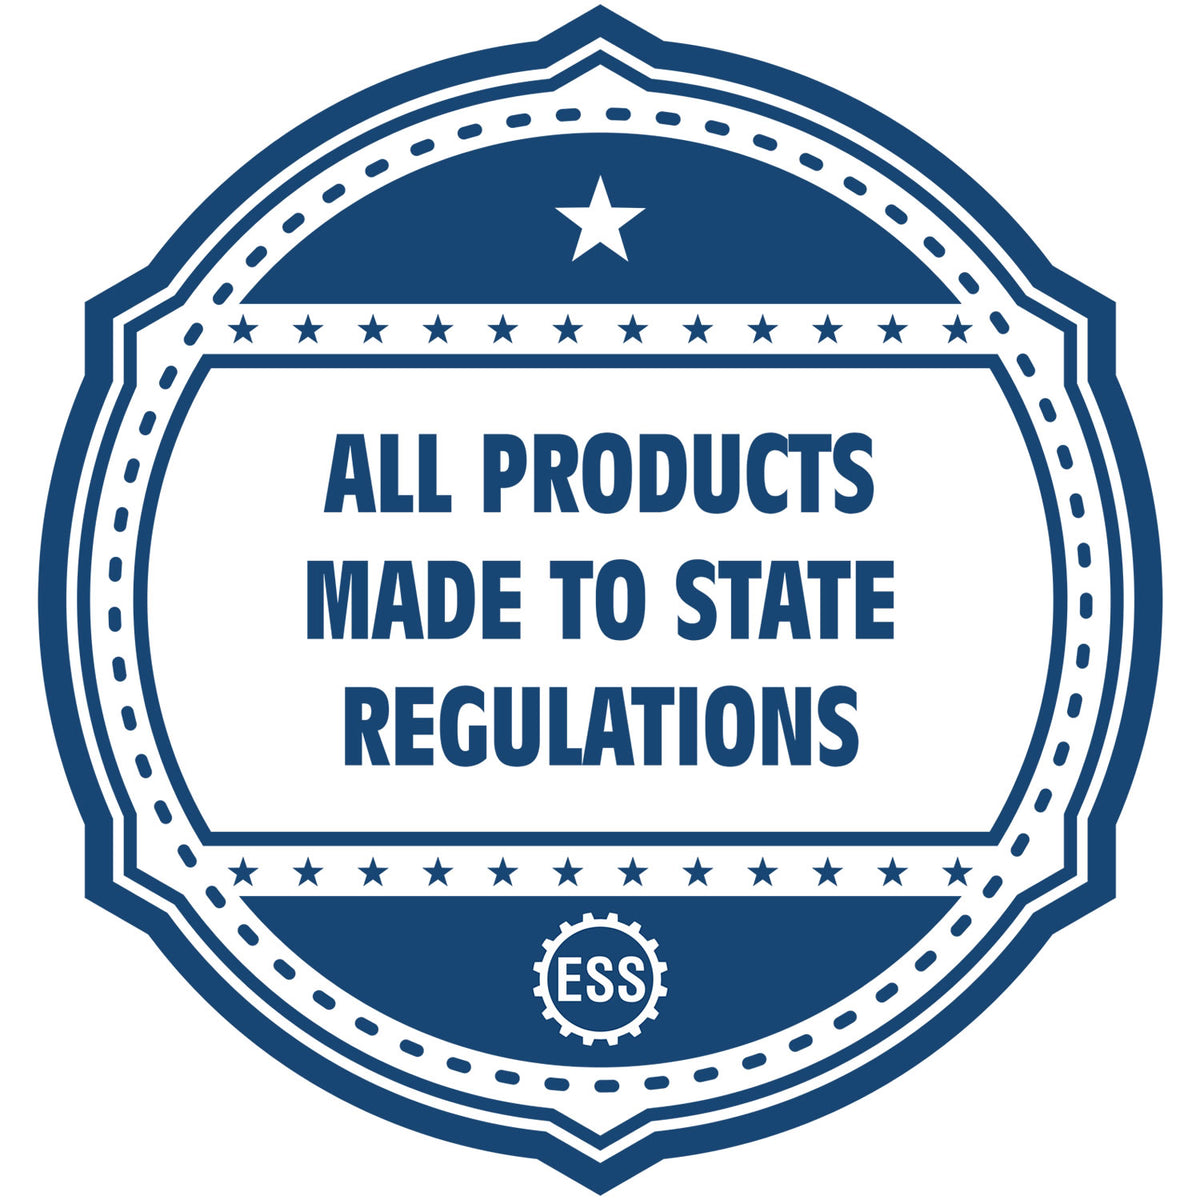 An icon or badge element for the Digital Utah PE Stamp and Electronic Seal for Utah Engineer showing that this product is made in compliance with state regulations.